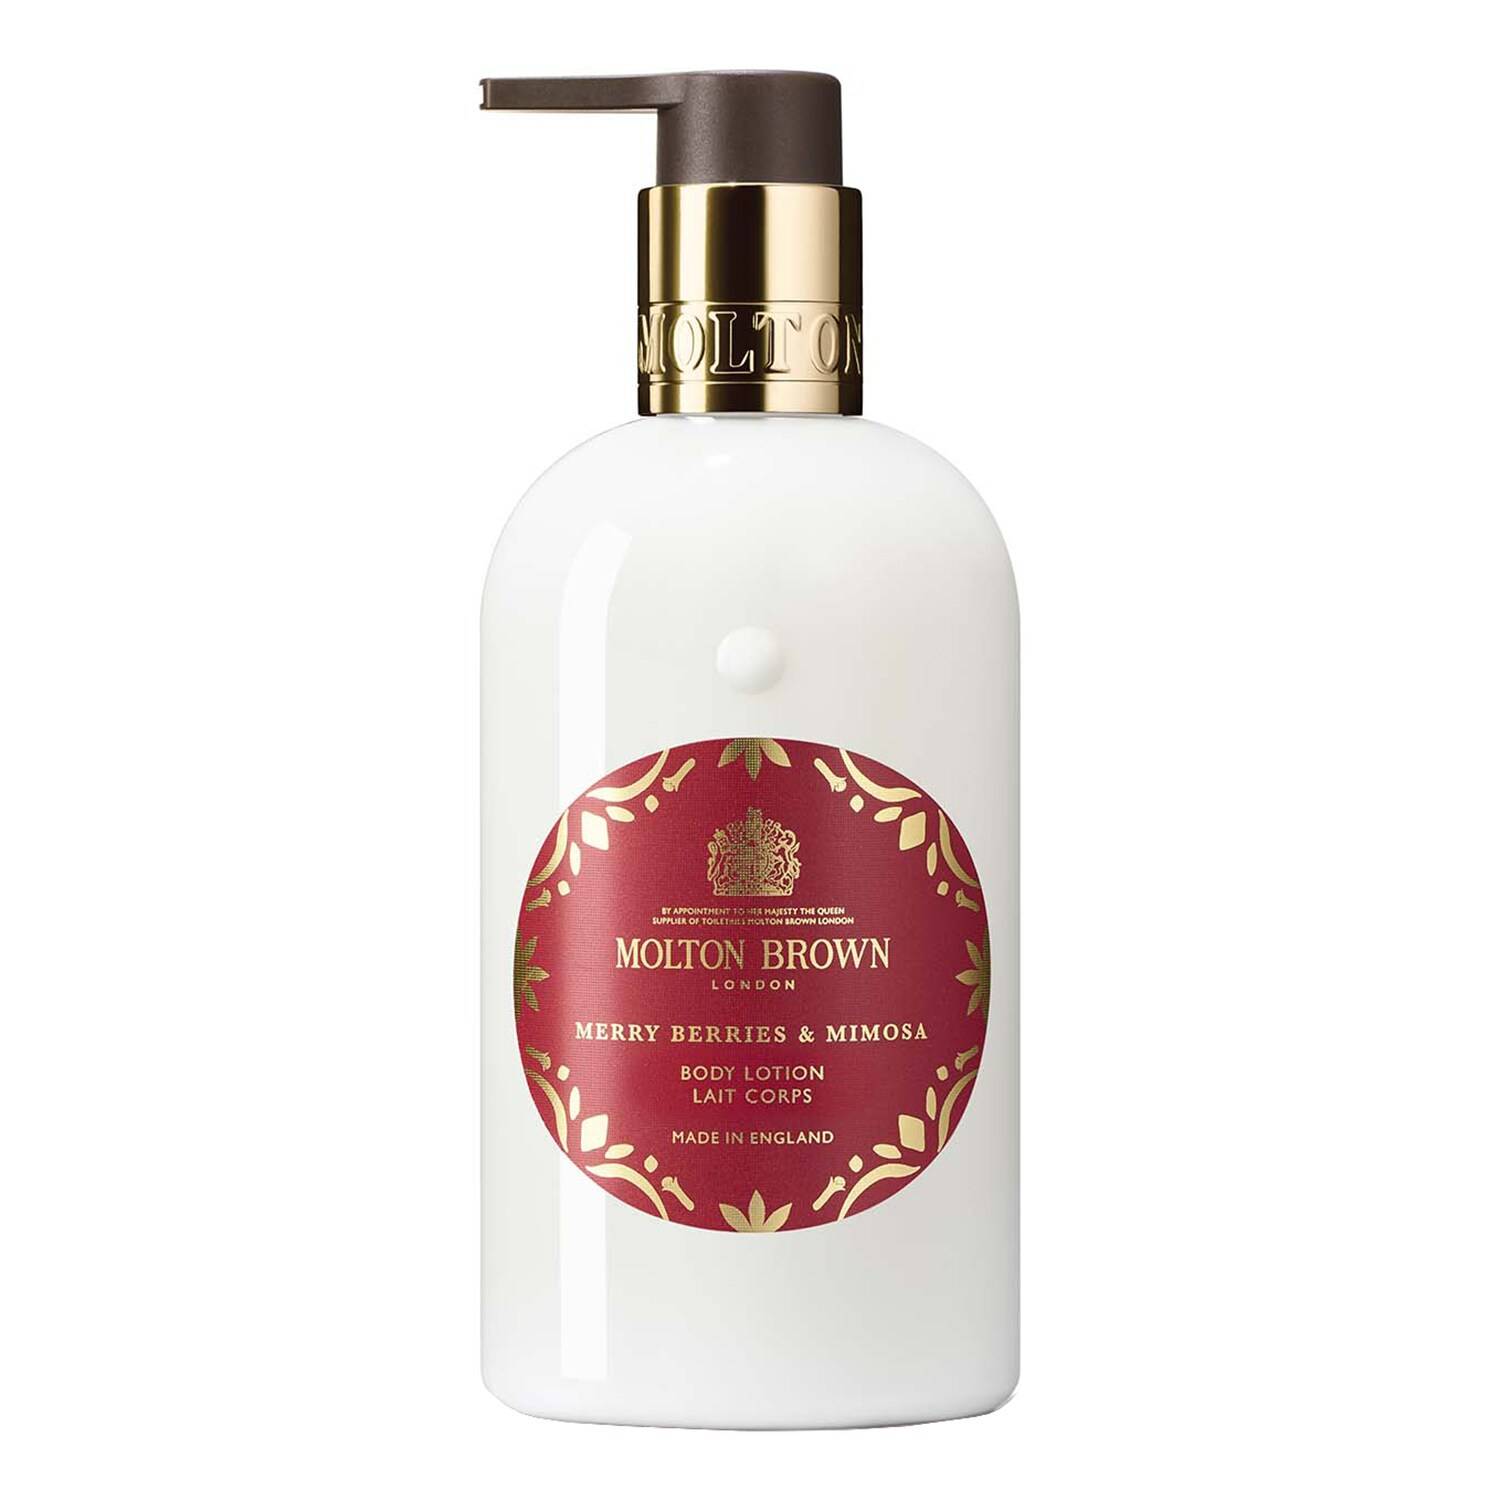 Molton Brown Merry Berries & Mimosa Body Lotion 300Ml